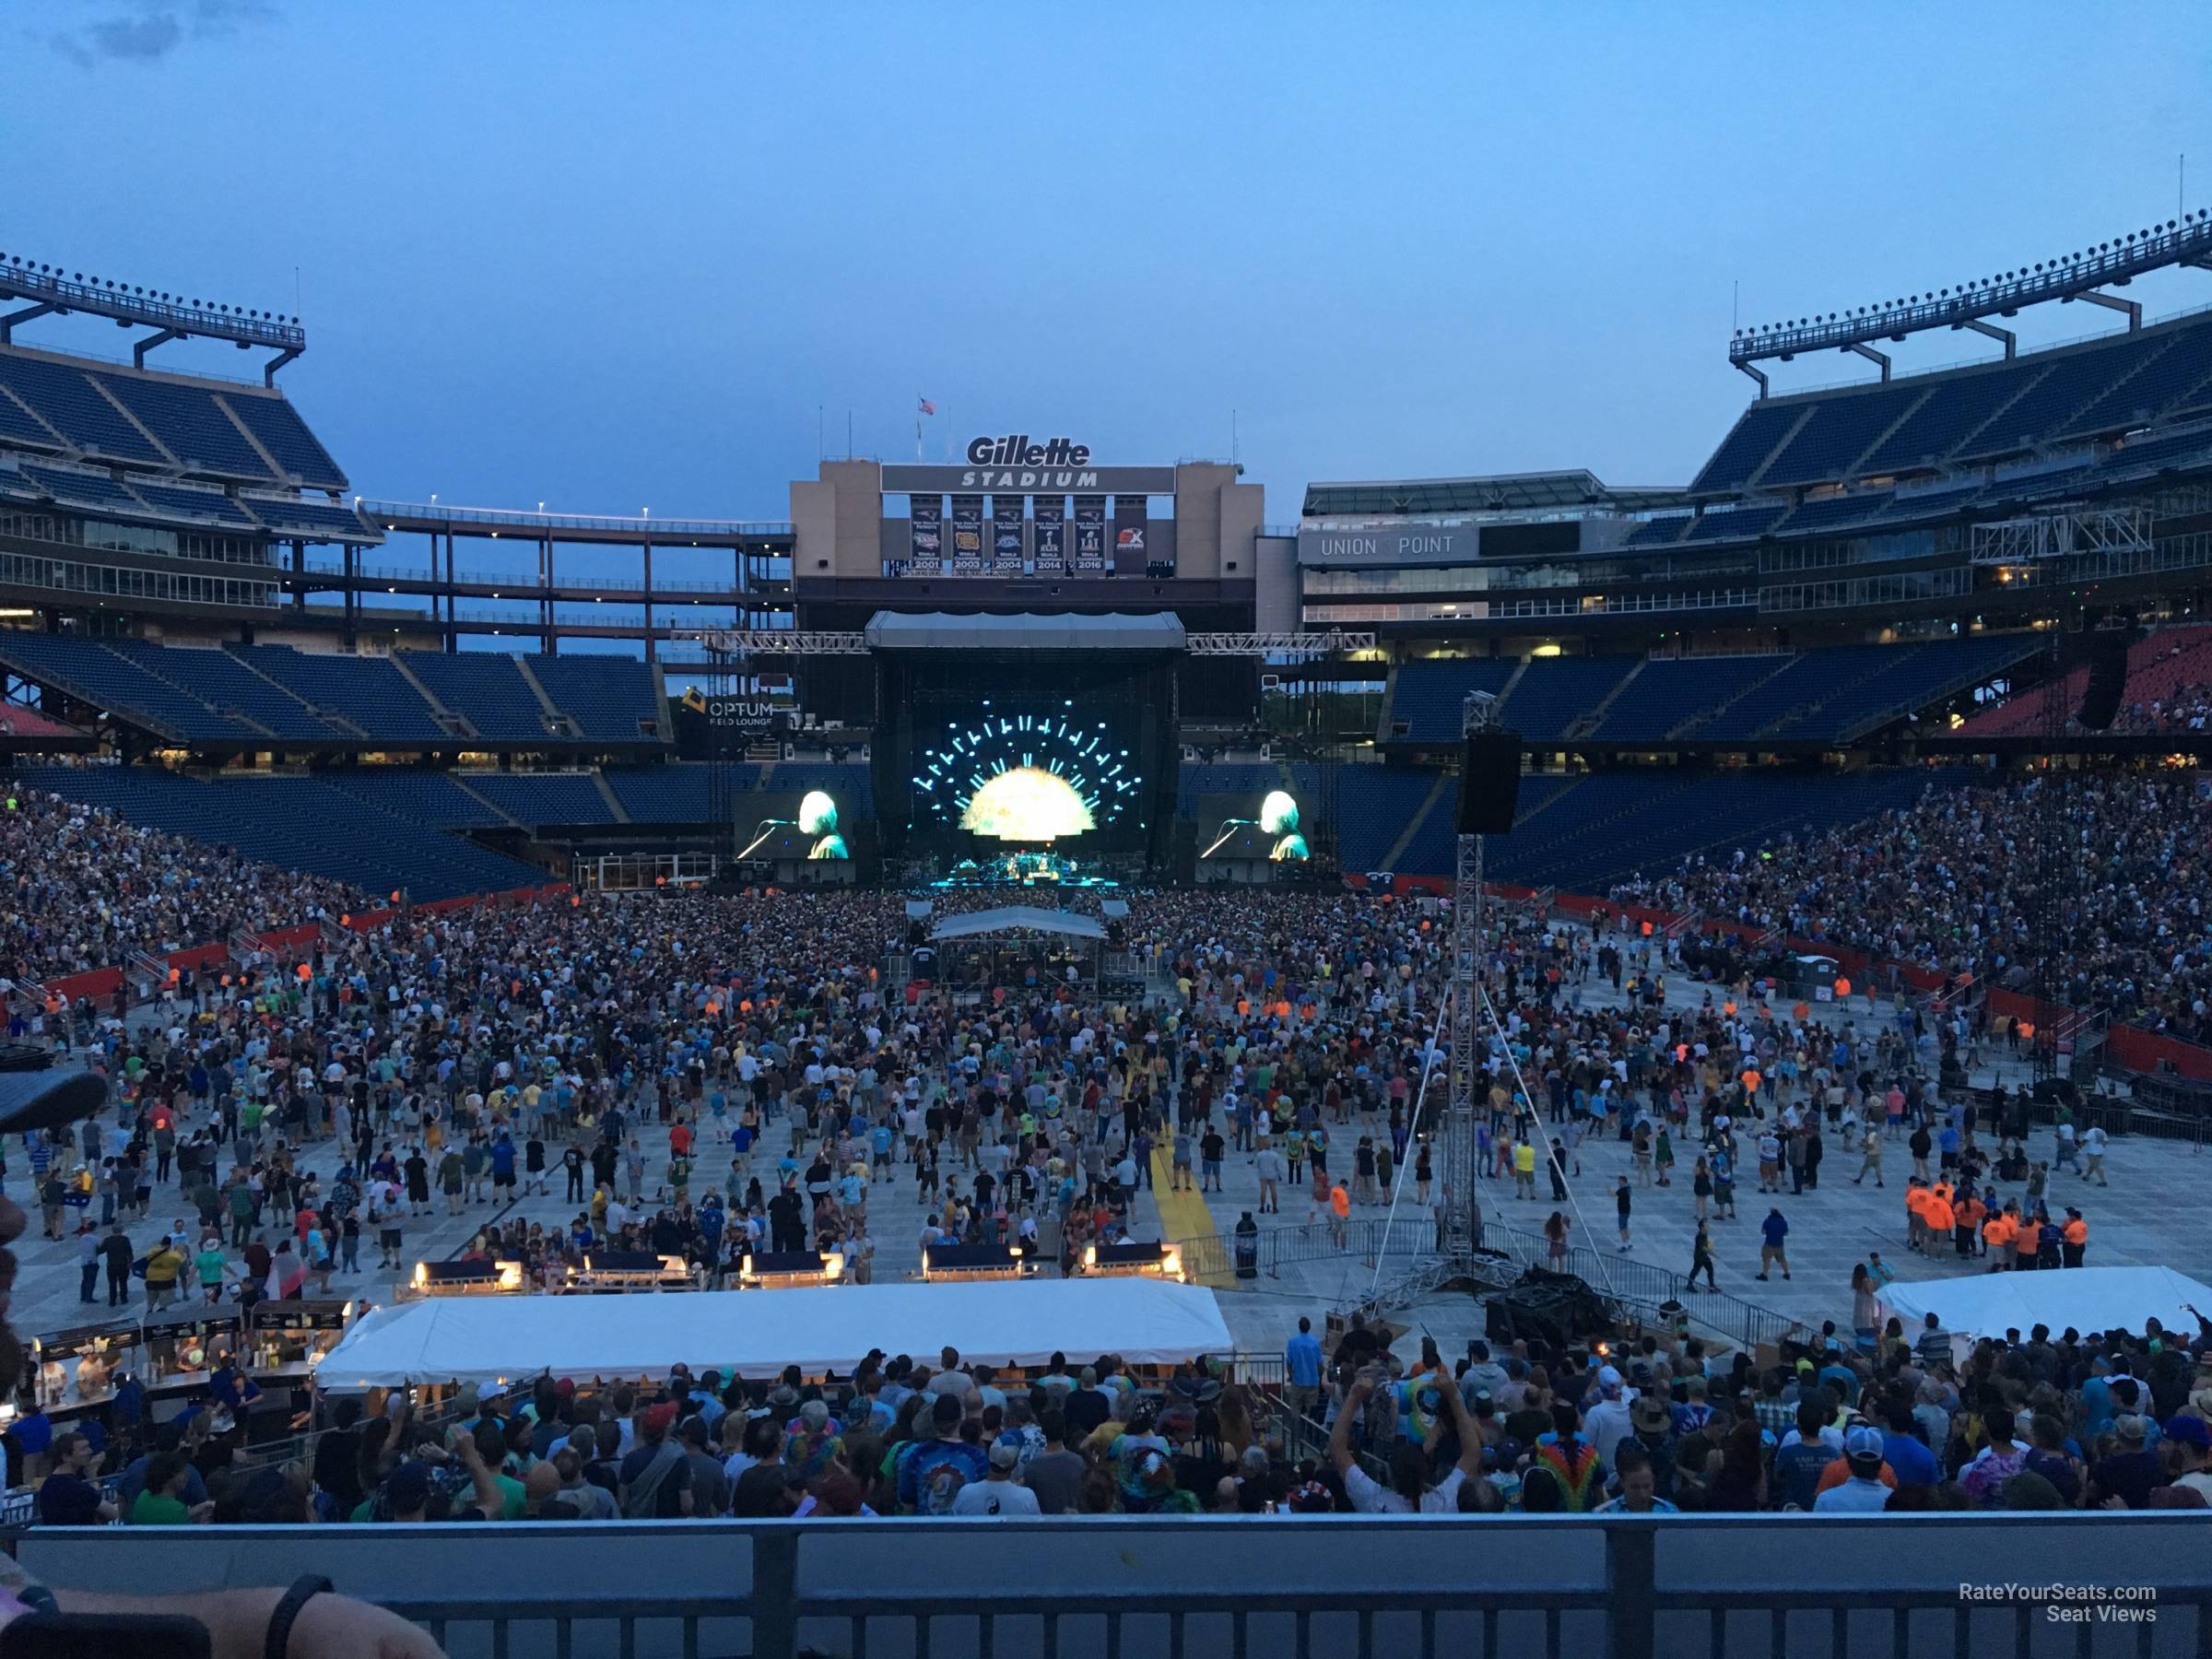 section 143, row 38 seat view  for concert - gillette stadium